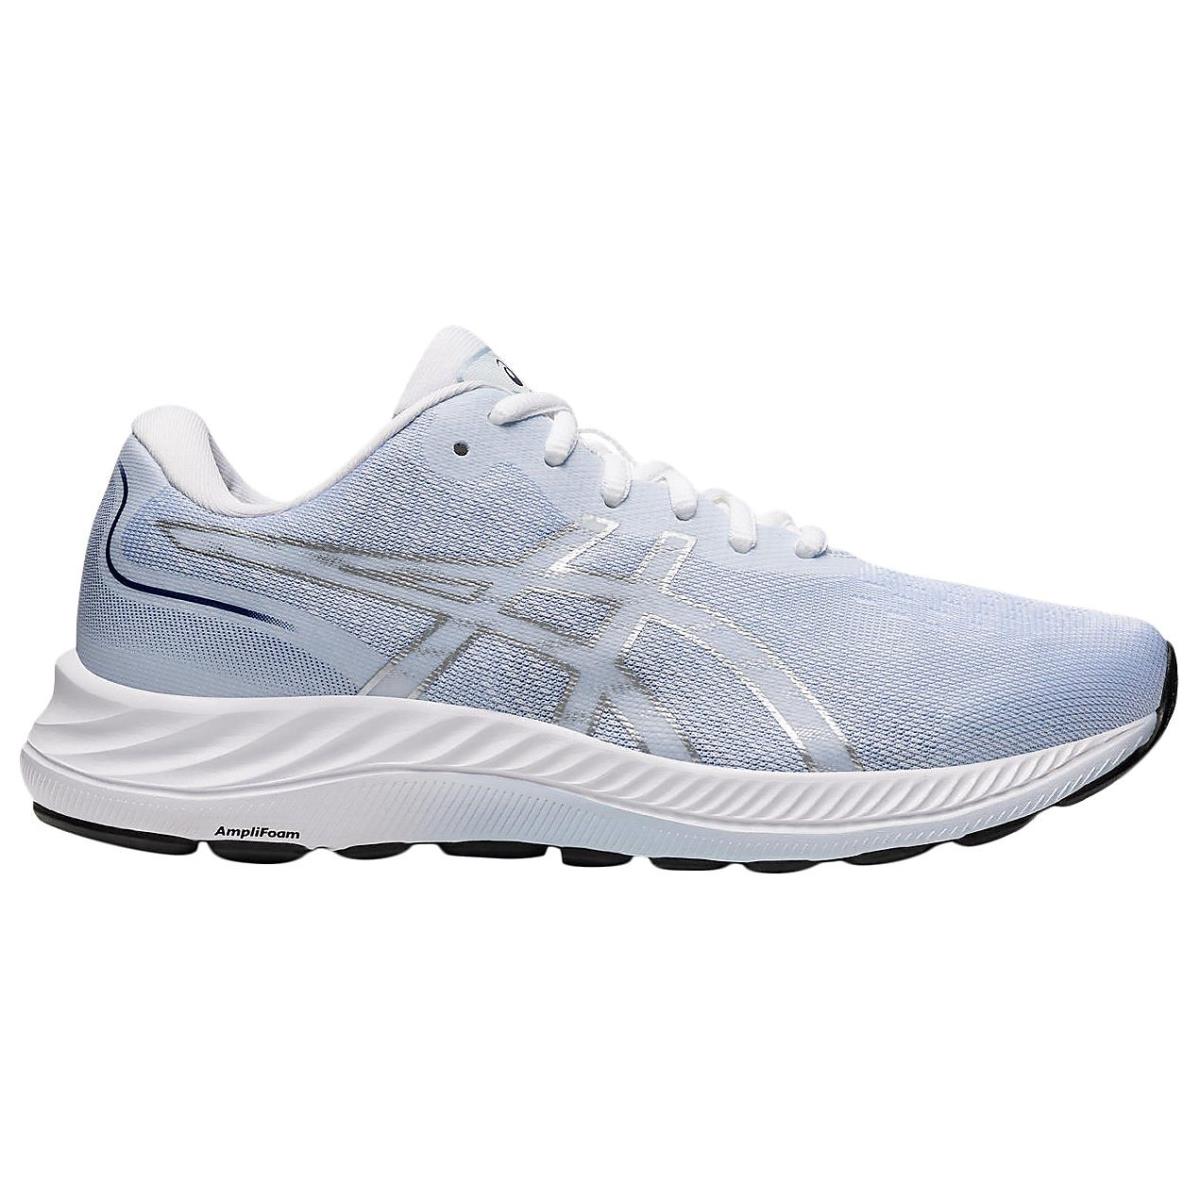 Asics Womens Gel Excite 9 Running Shoes White/Pure Silver